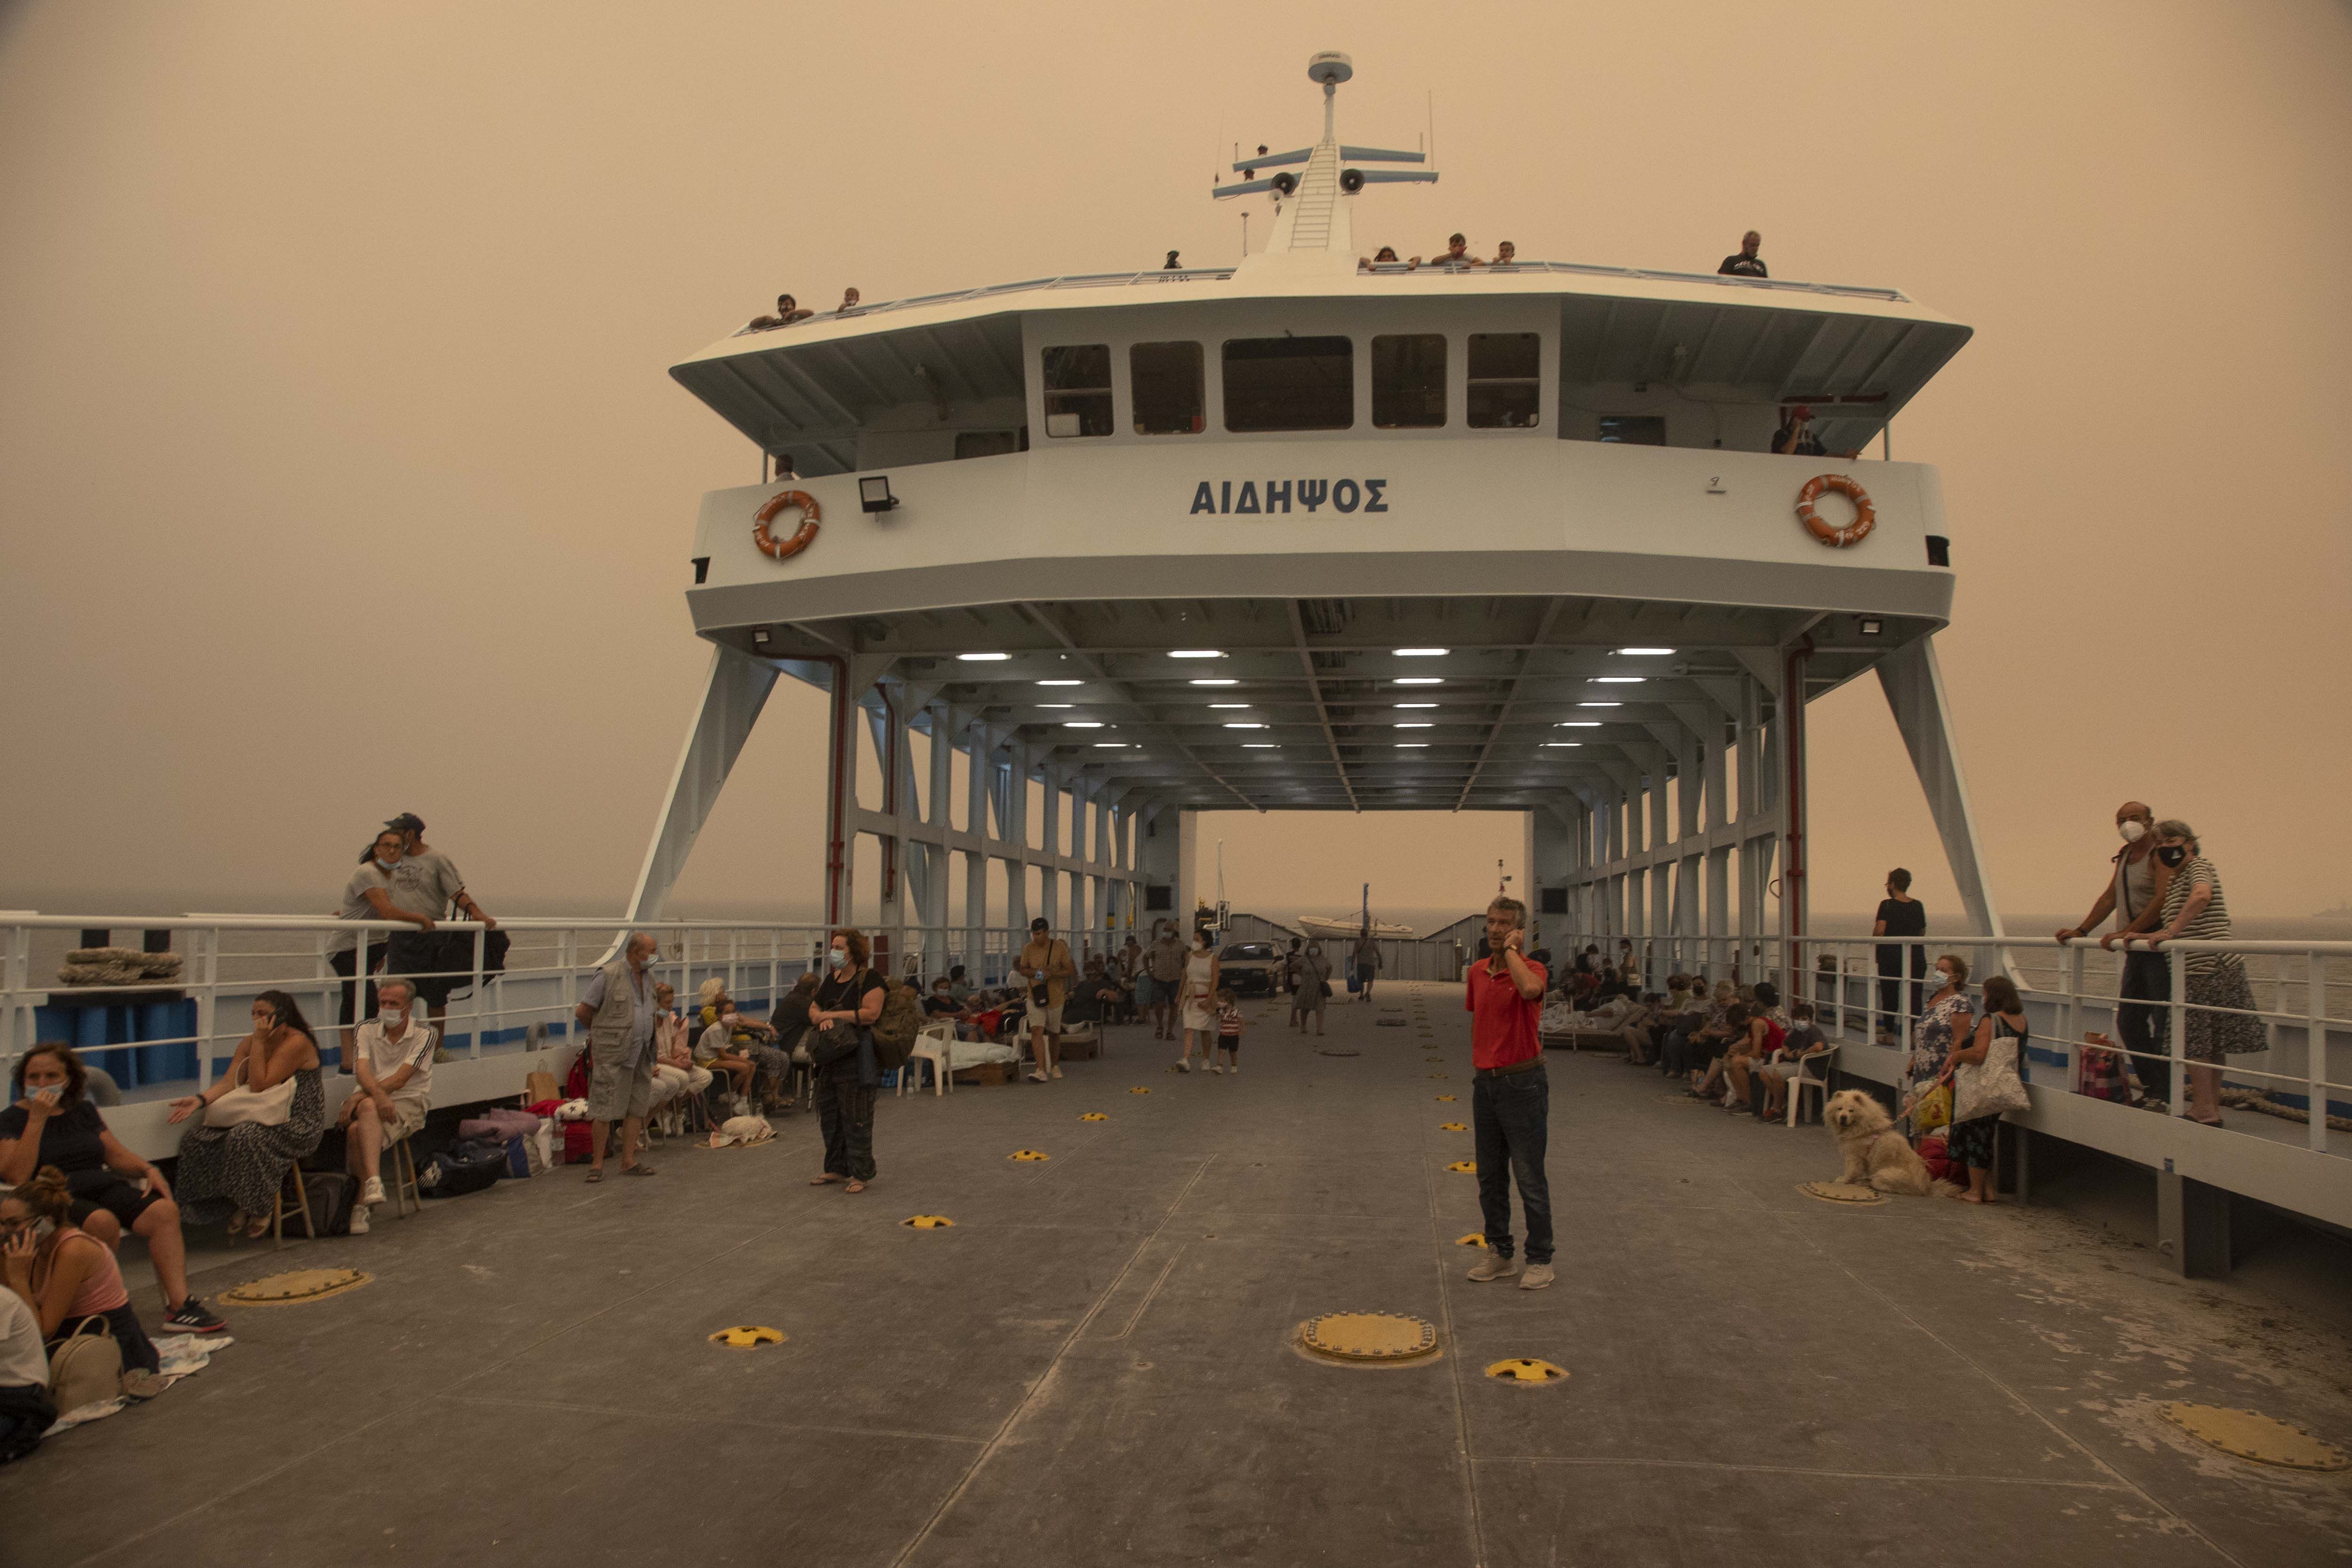 A ferry hosting people who can't evacuate in Greece, surrounded by a hazy orange sky 